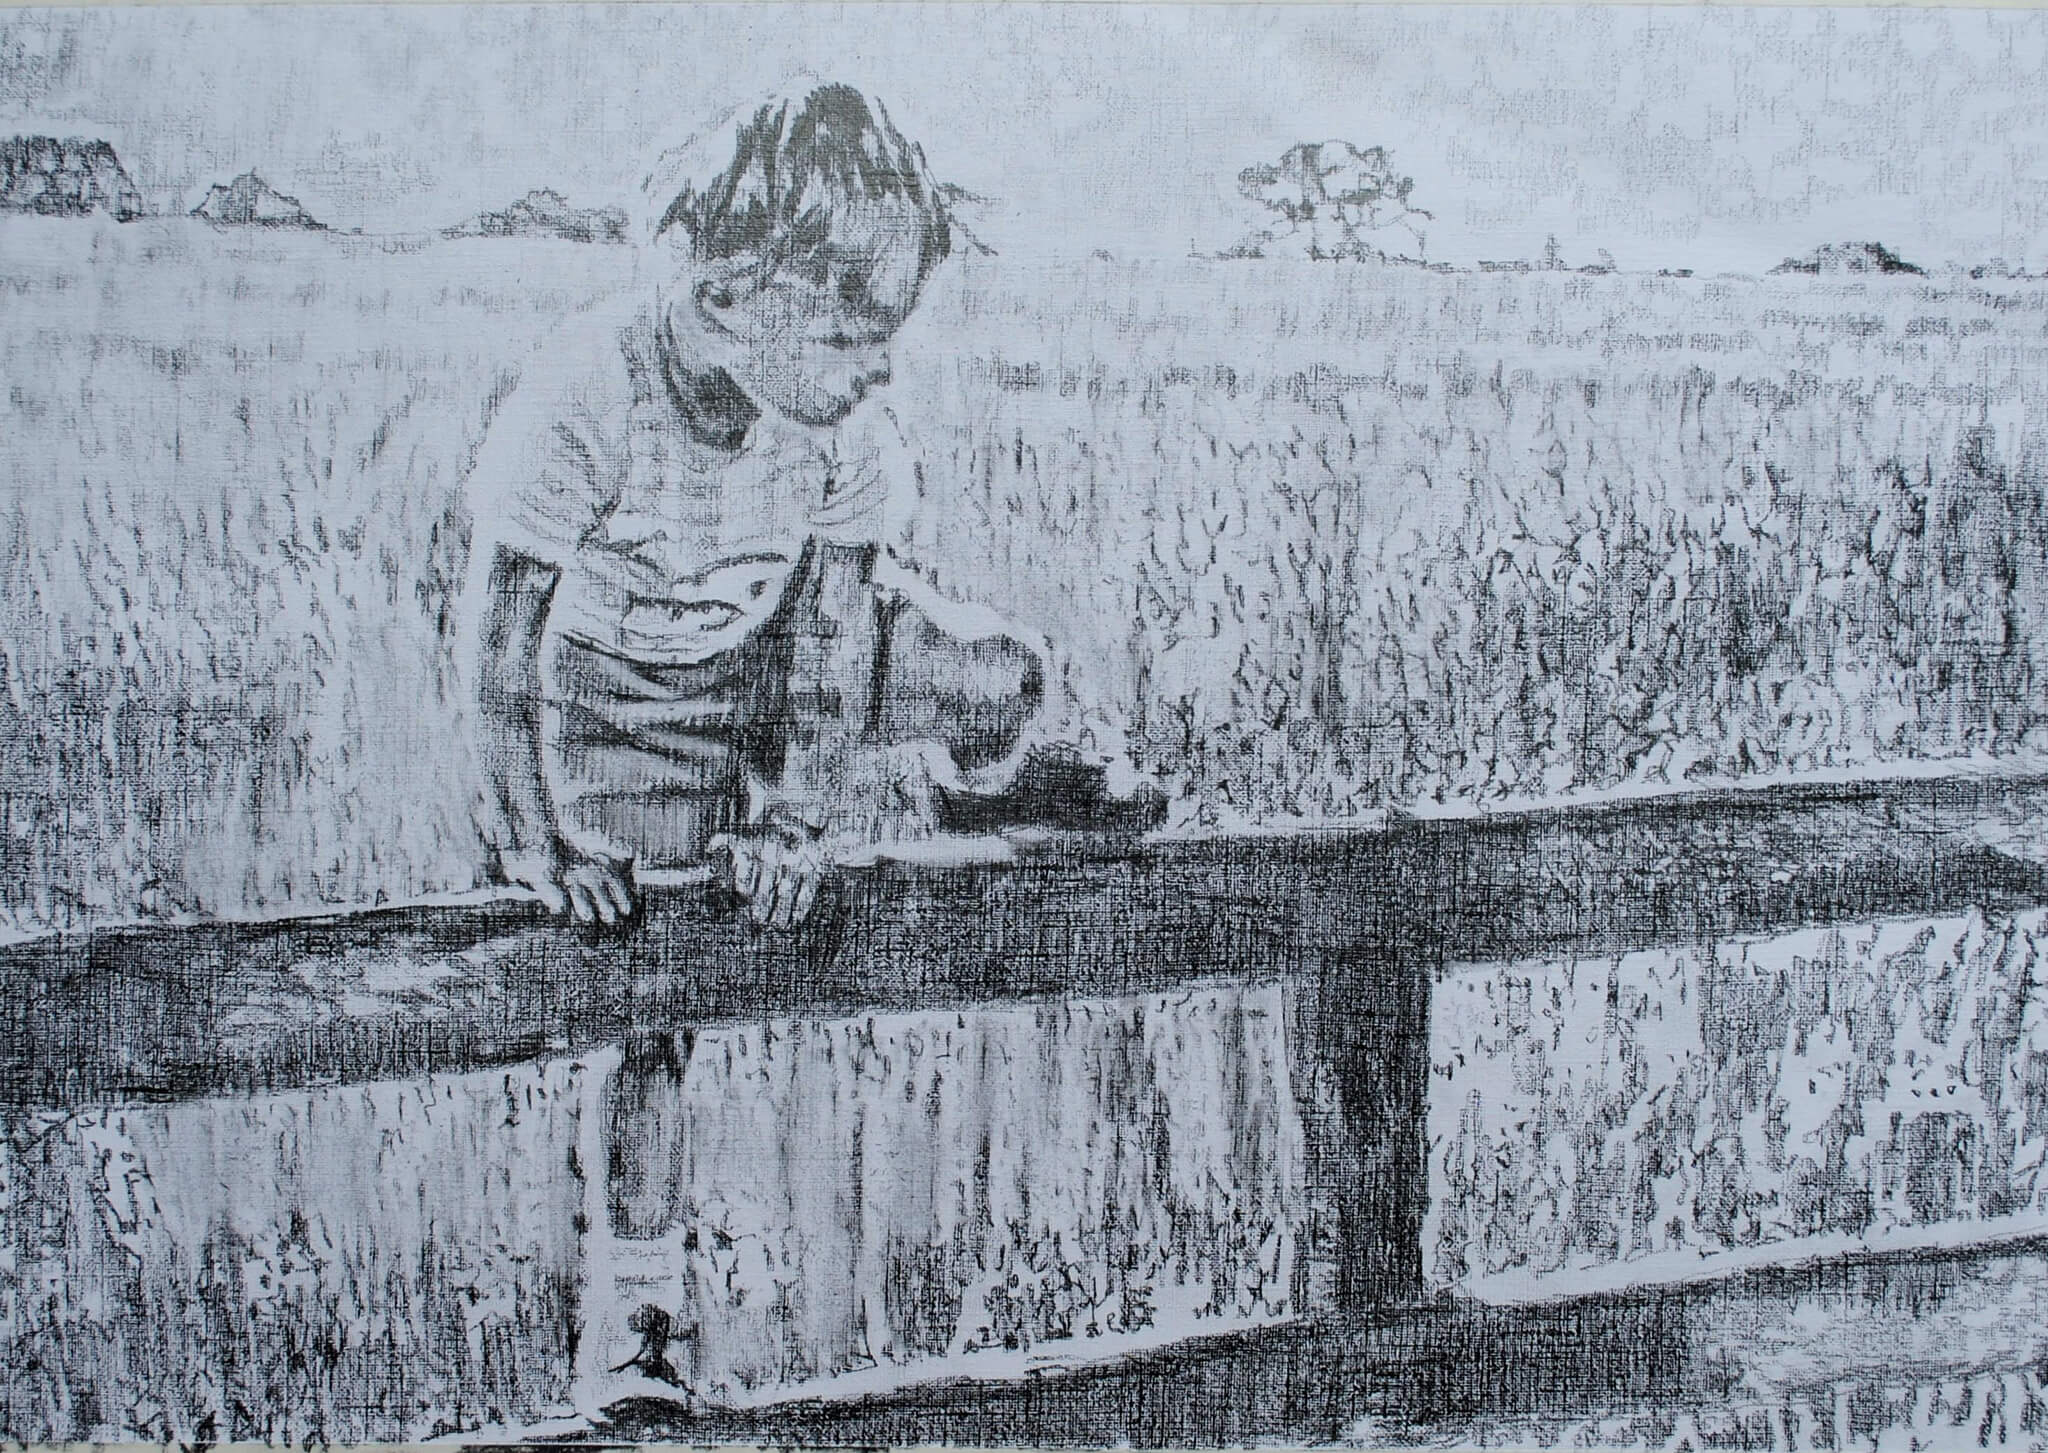 A Shropshire lad pencil on paper biographical portrait by Stella Tooth